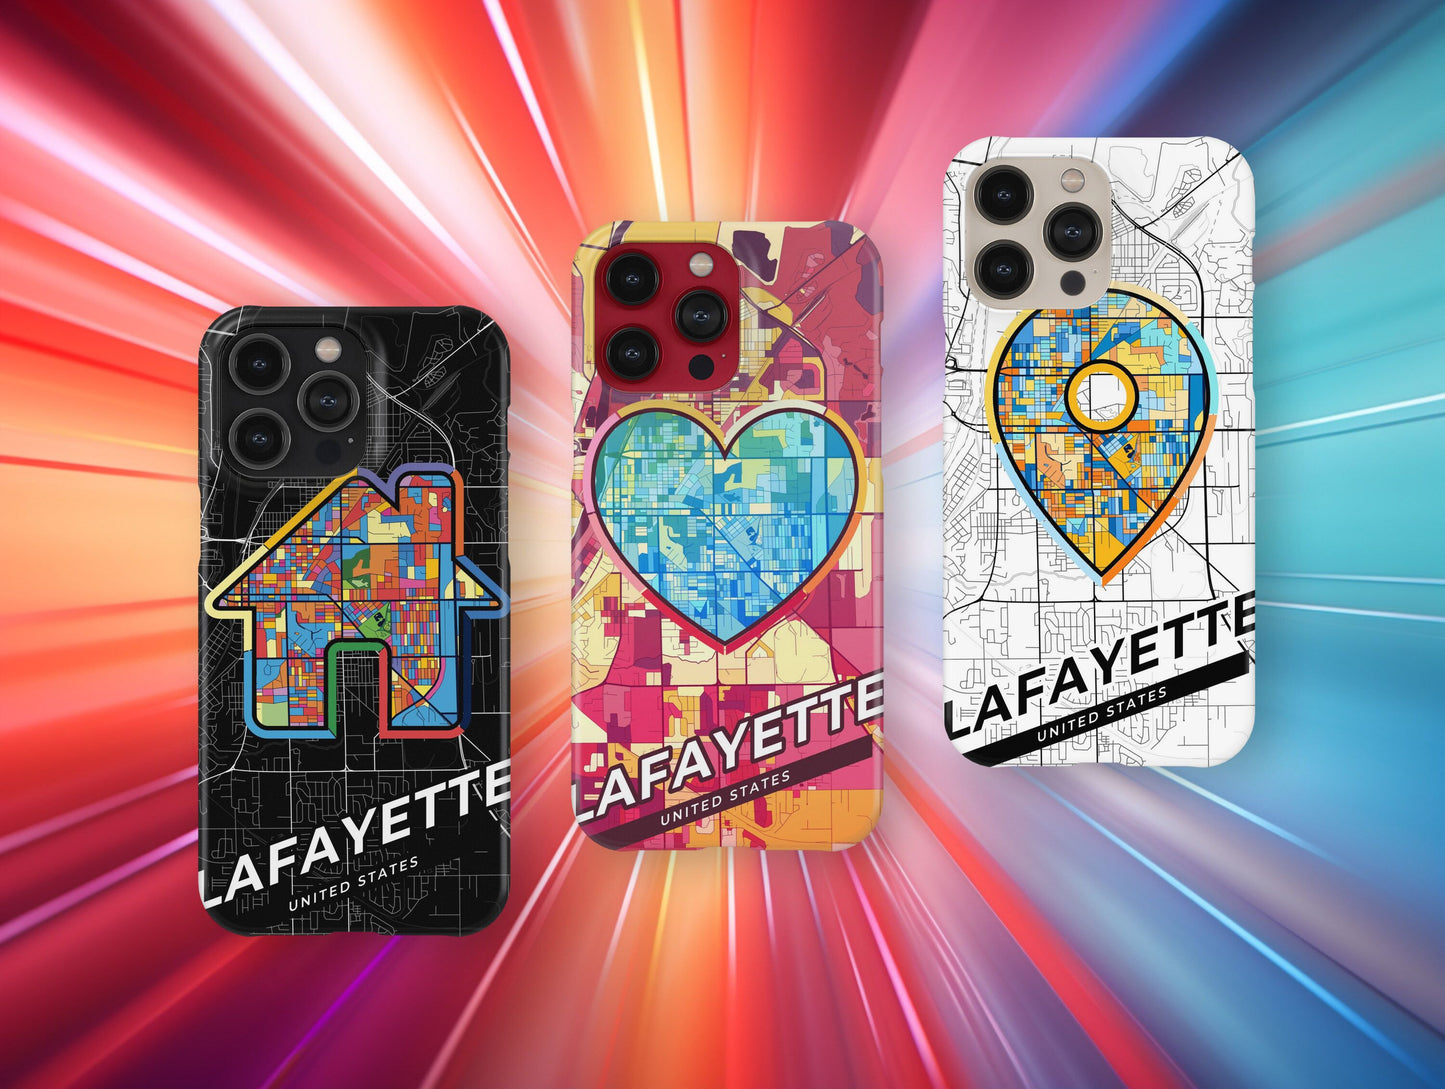 Lafayette Indiana slim phone case with colorful icon. Birthday, wedding or housewarming gift. Couple match cases.